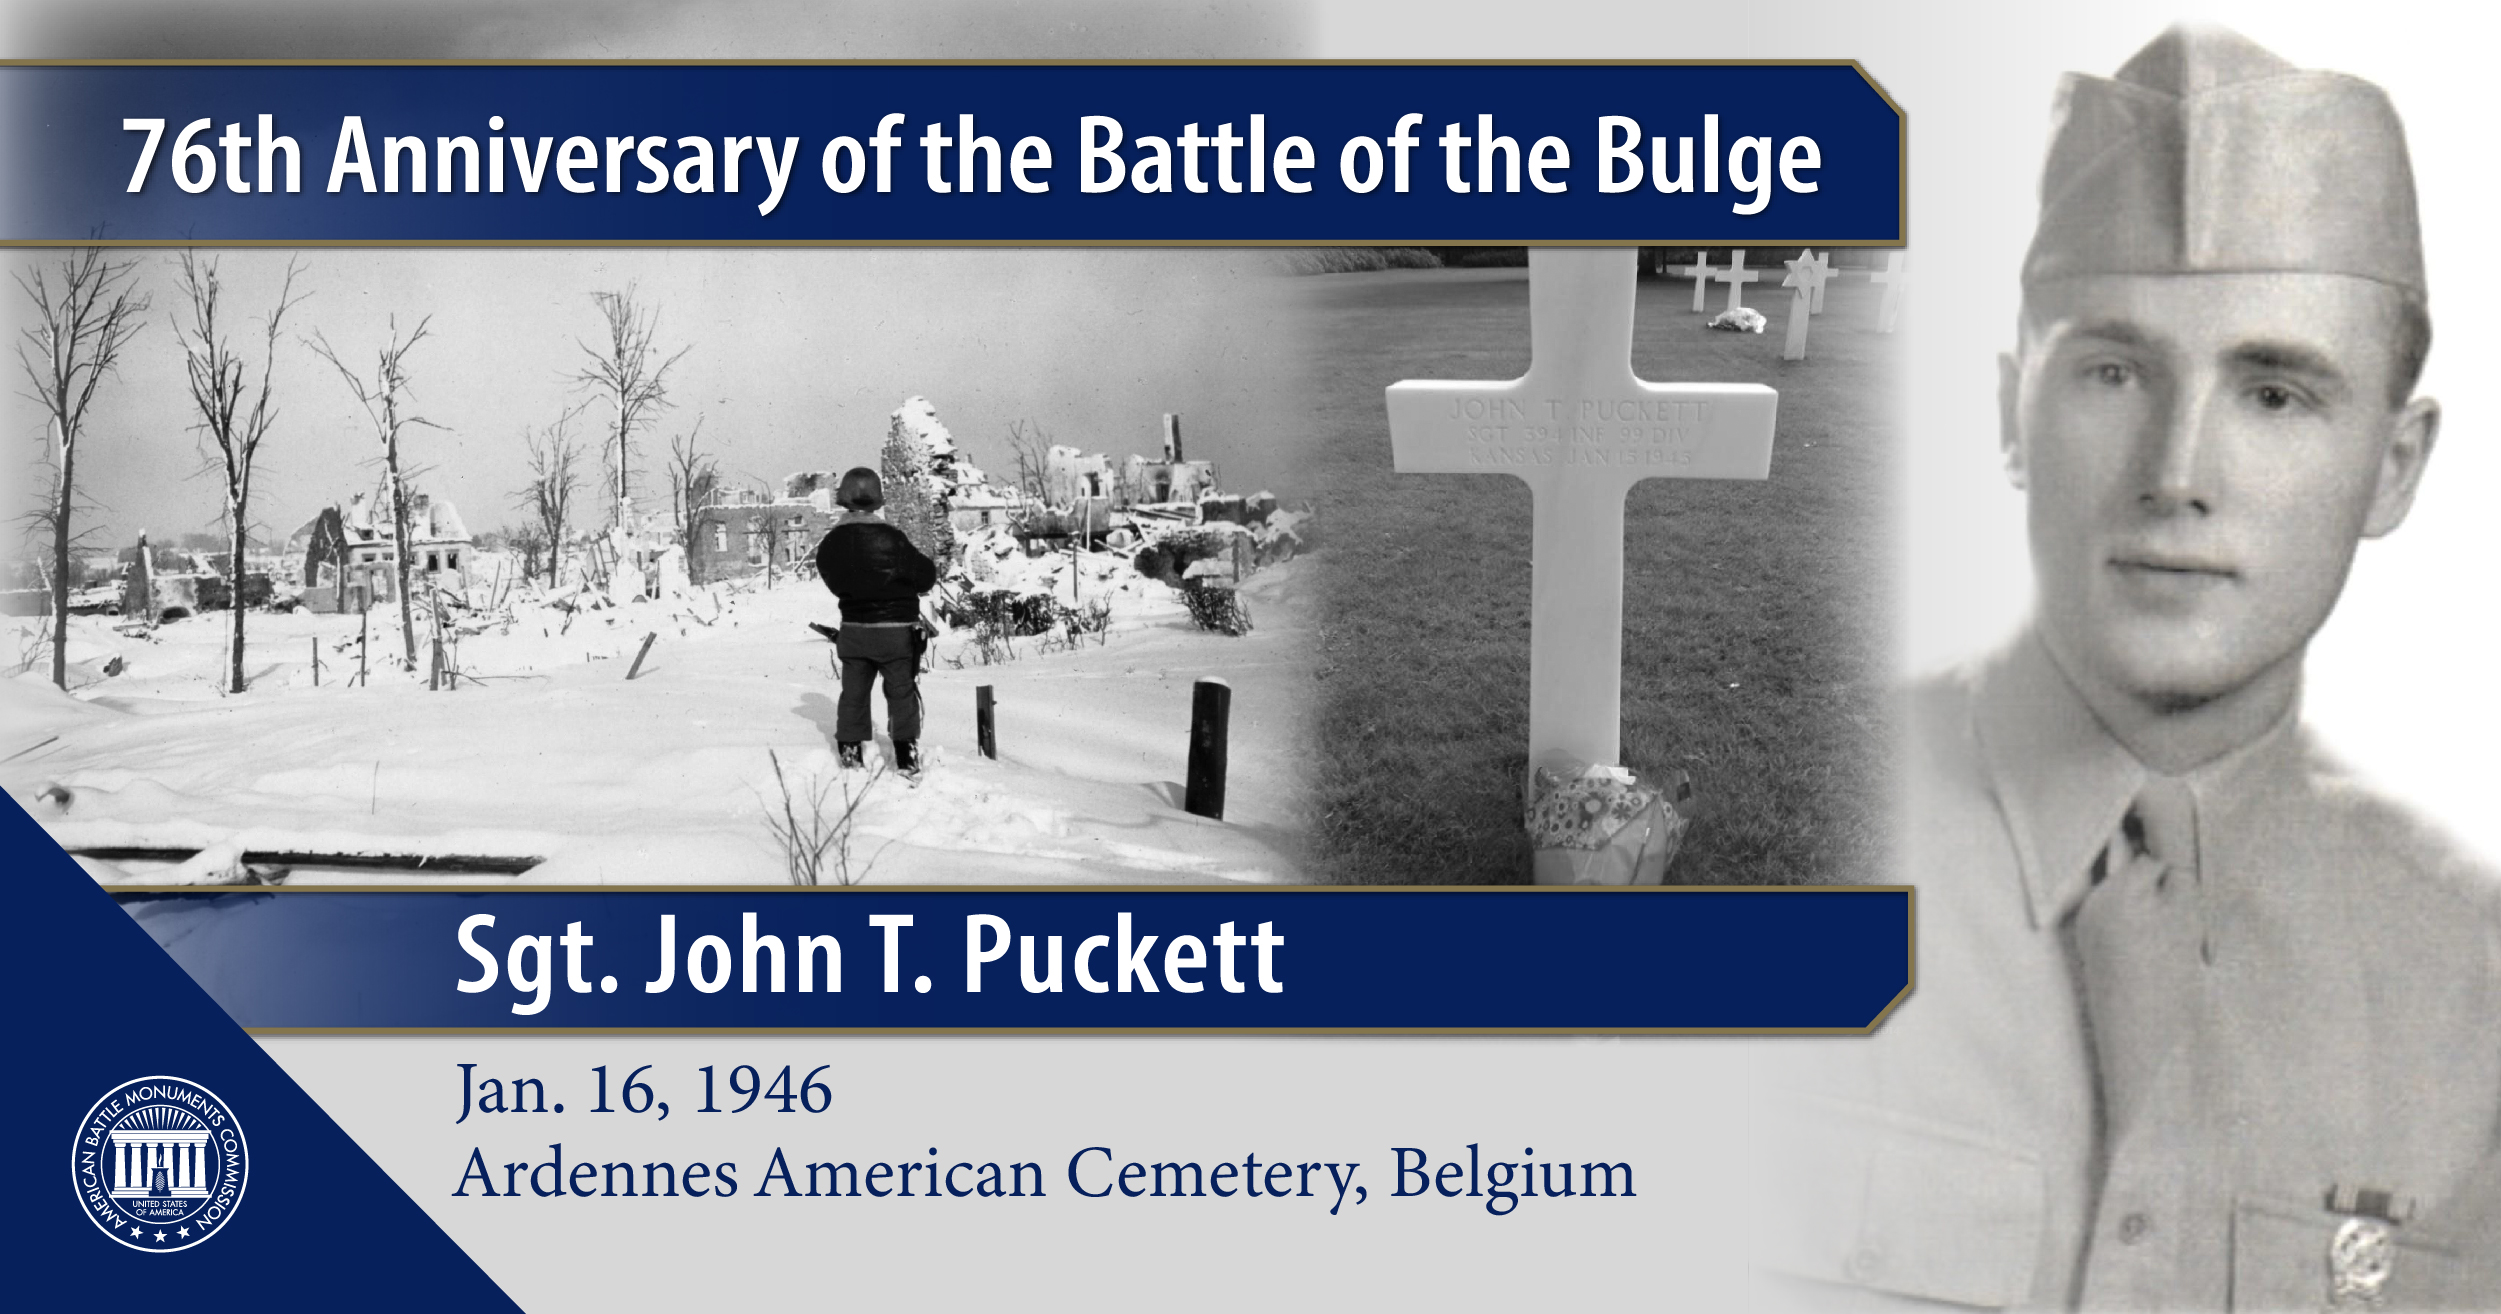 Sgt. John T. Puckett, buried in Ardennes American Cemetery